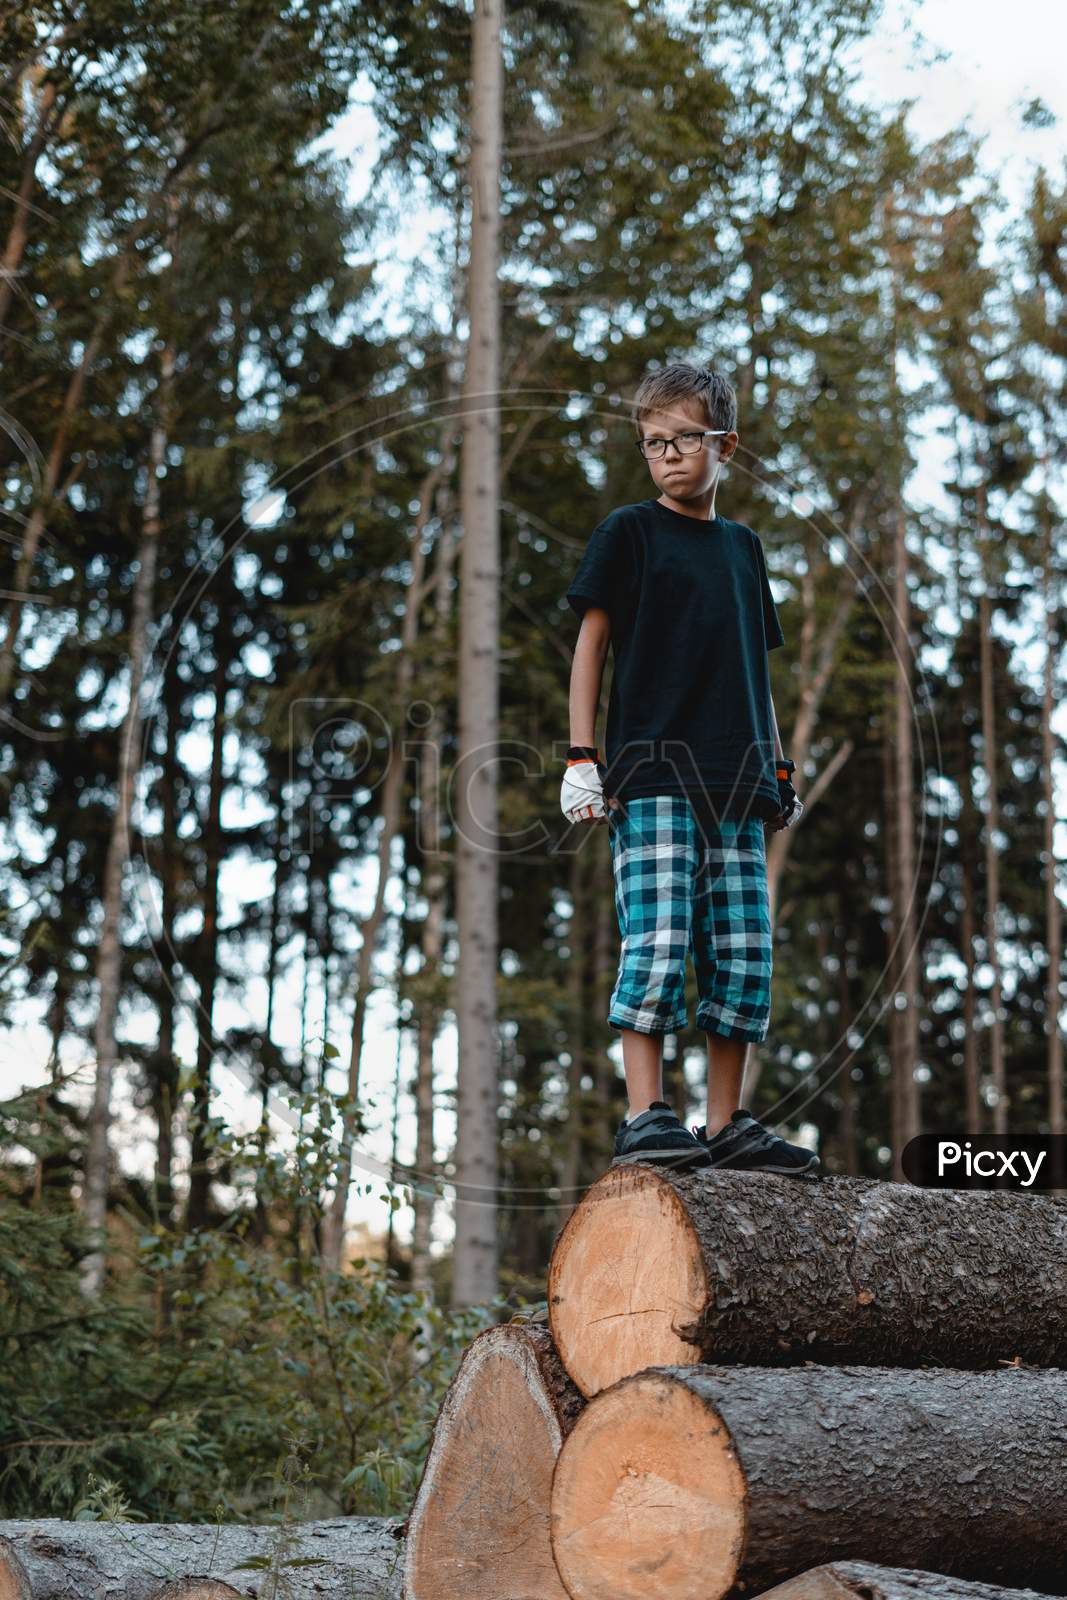 Teenager standing on the wood pile